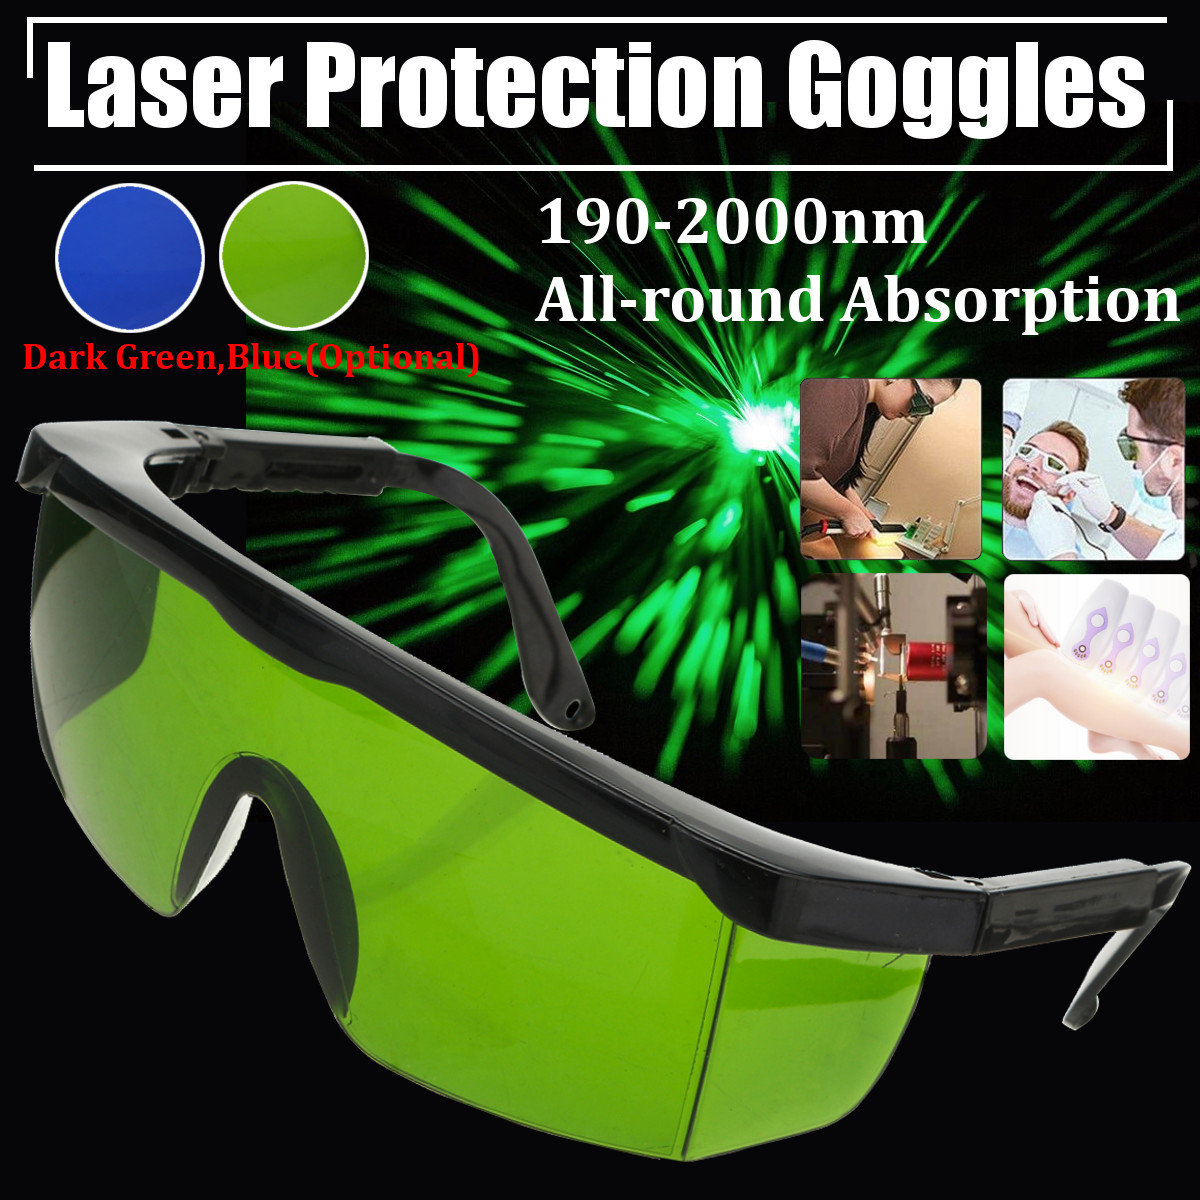 Pro Laser Protection Goggles Protective Safety Glasses IPL OD+4D 190nm-2000nm Laser Goggles 16